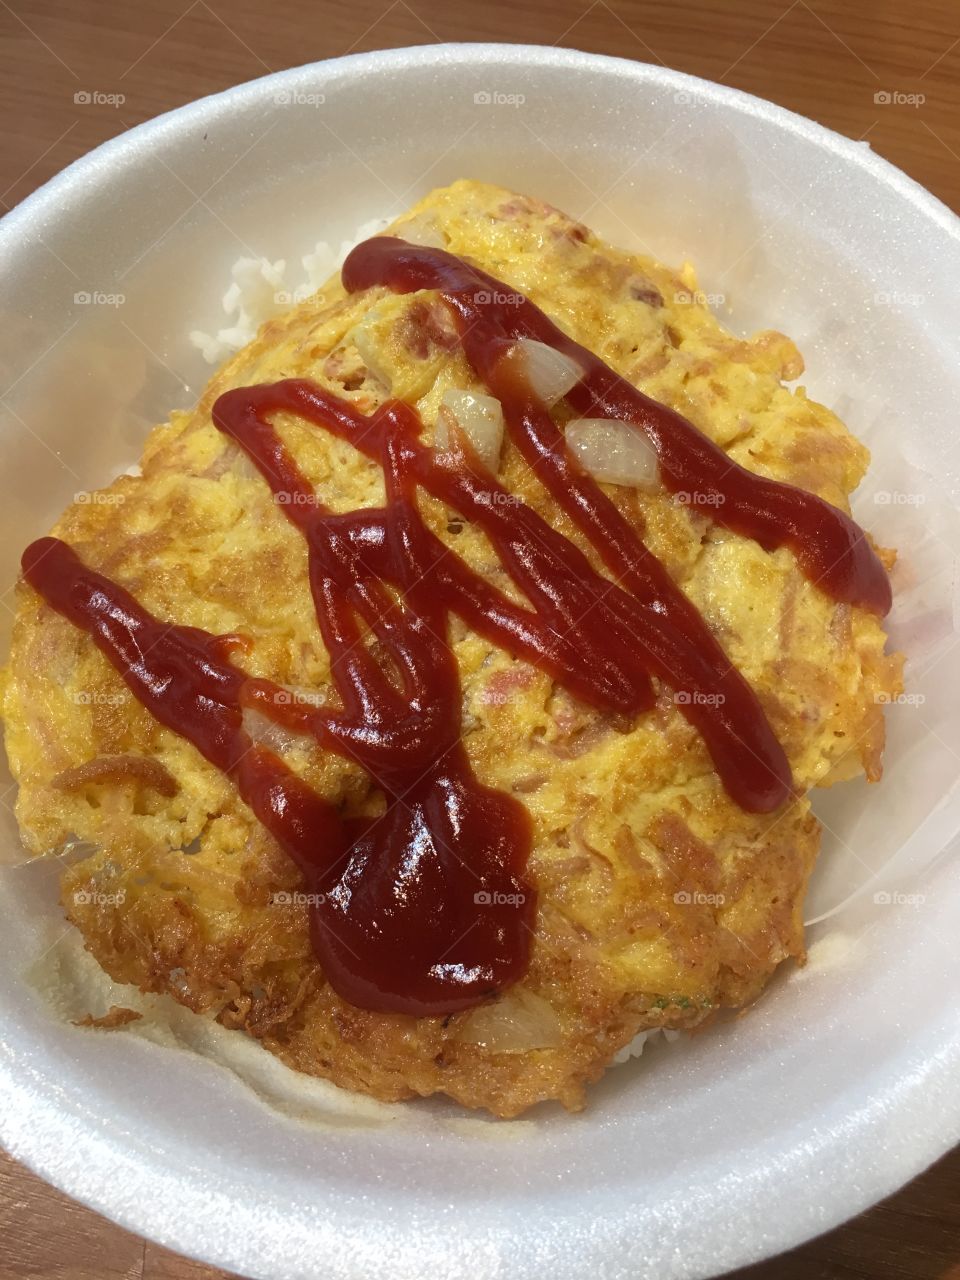 If you're hungry, you'll think about it. “Omelet on rice”